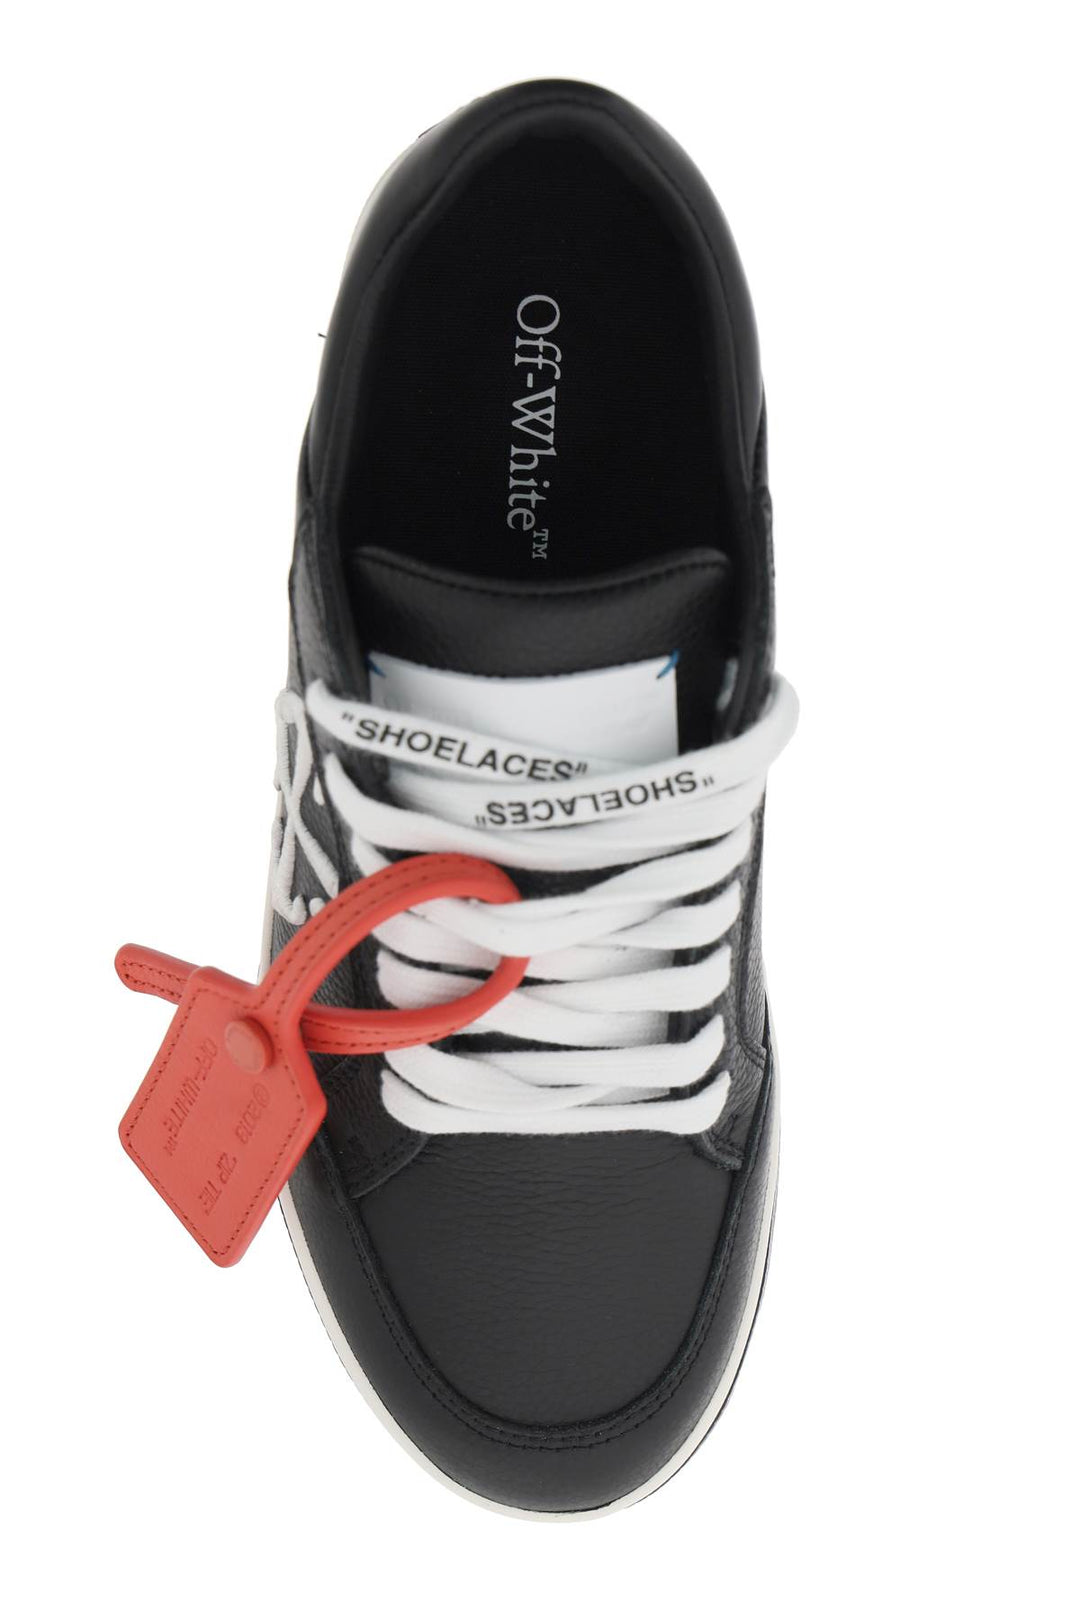 Off White Low Leather Vulcanized Sneakers For   Nero